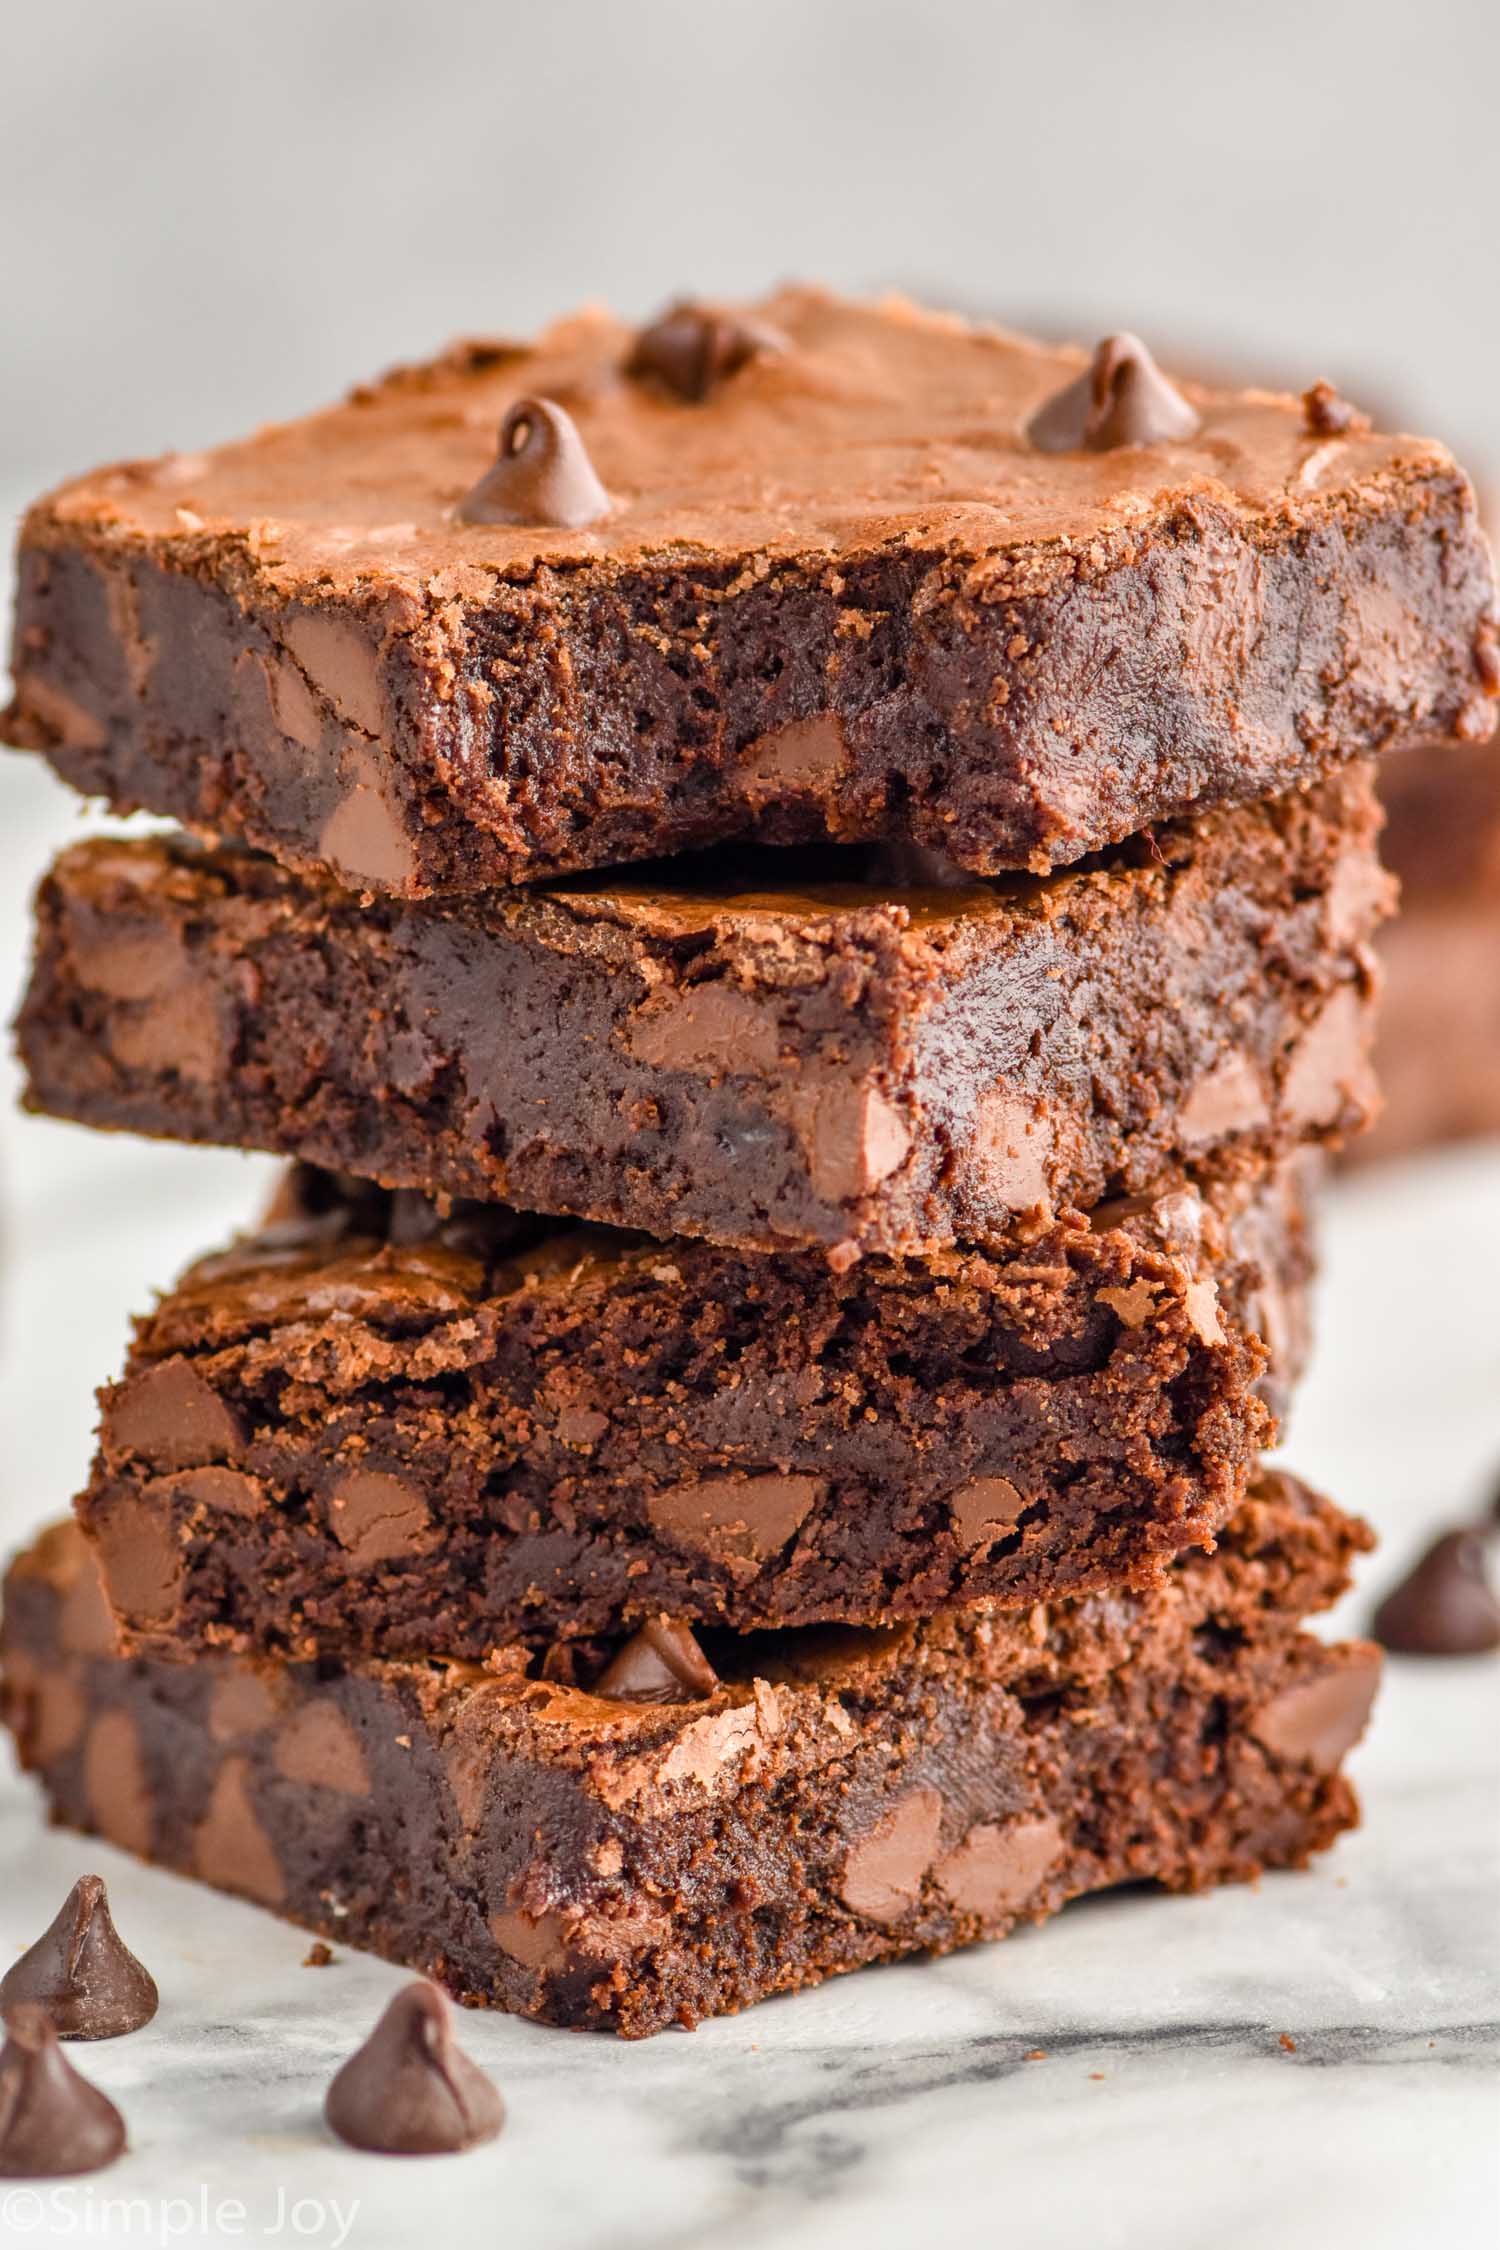 Easy Homemade Brownies - My Texas Kitchen